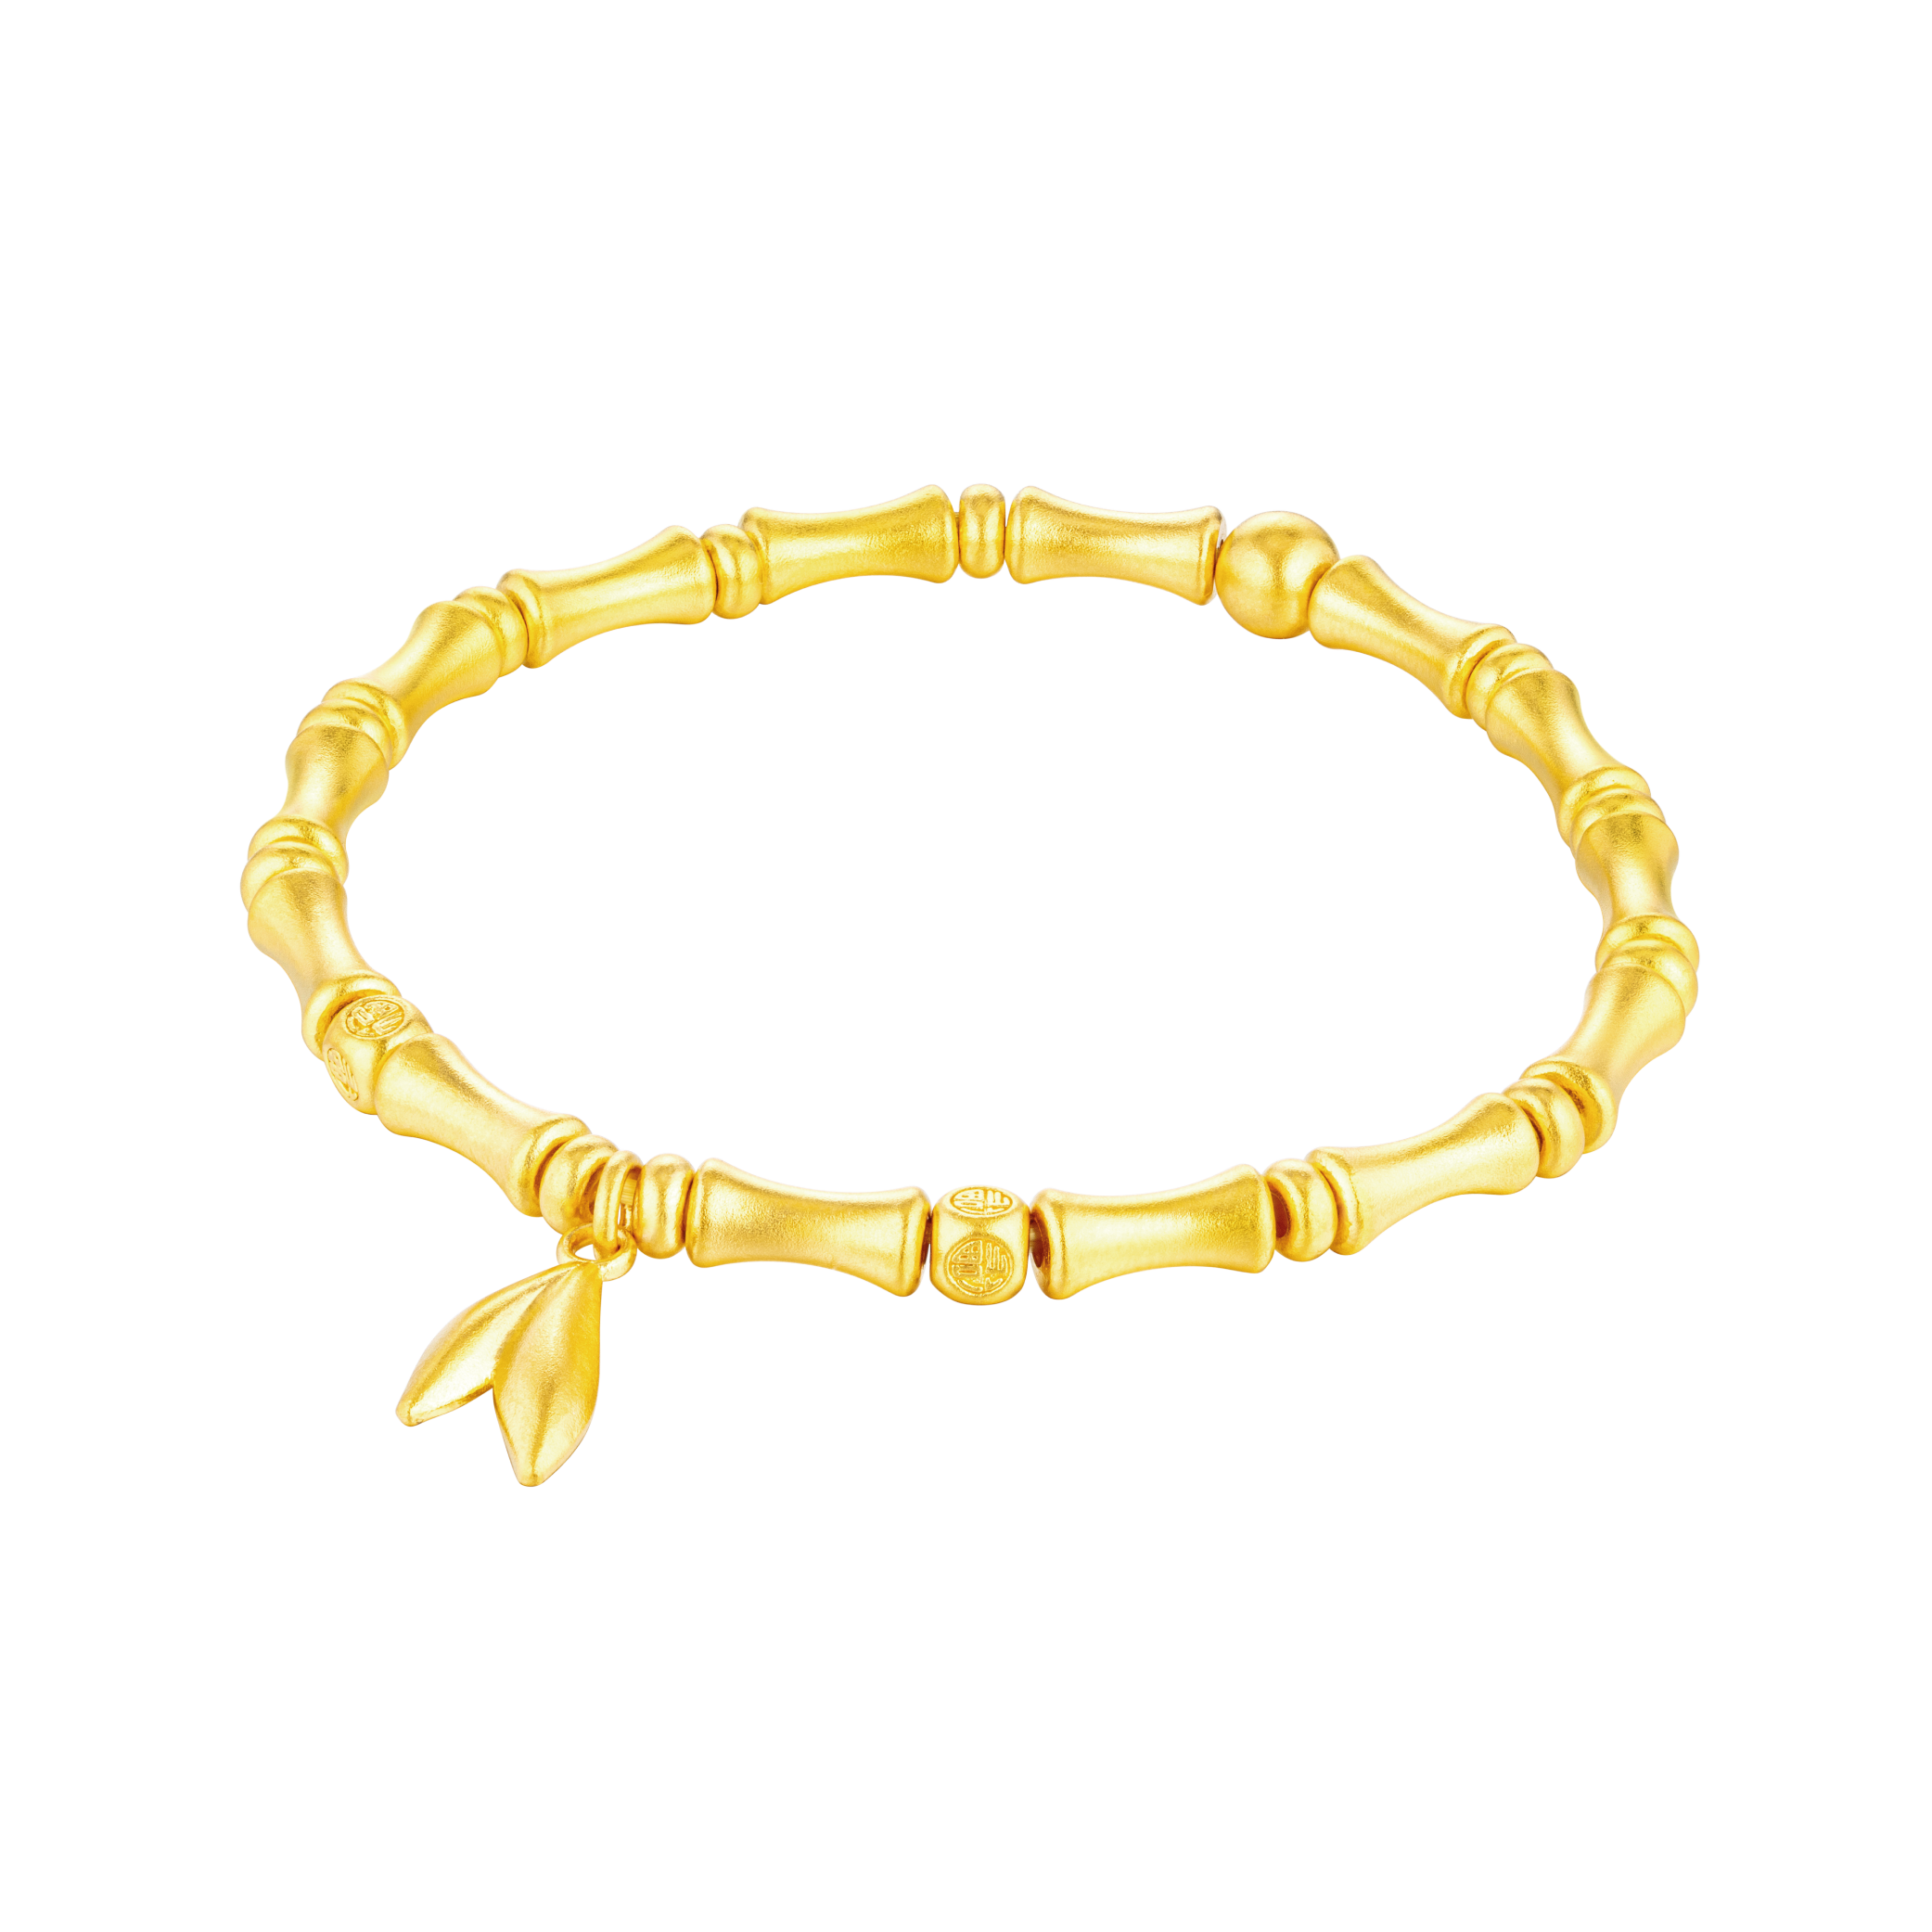 Heirloom Fortune Collection "Bamboo Tells Peace" Gold Bracelet 